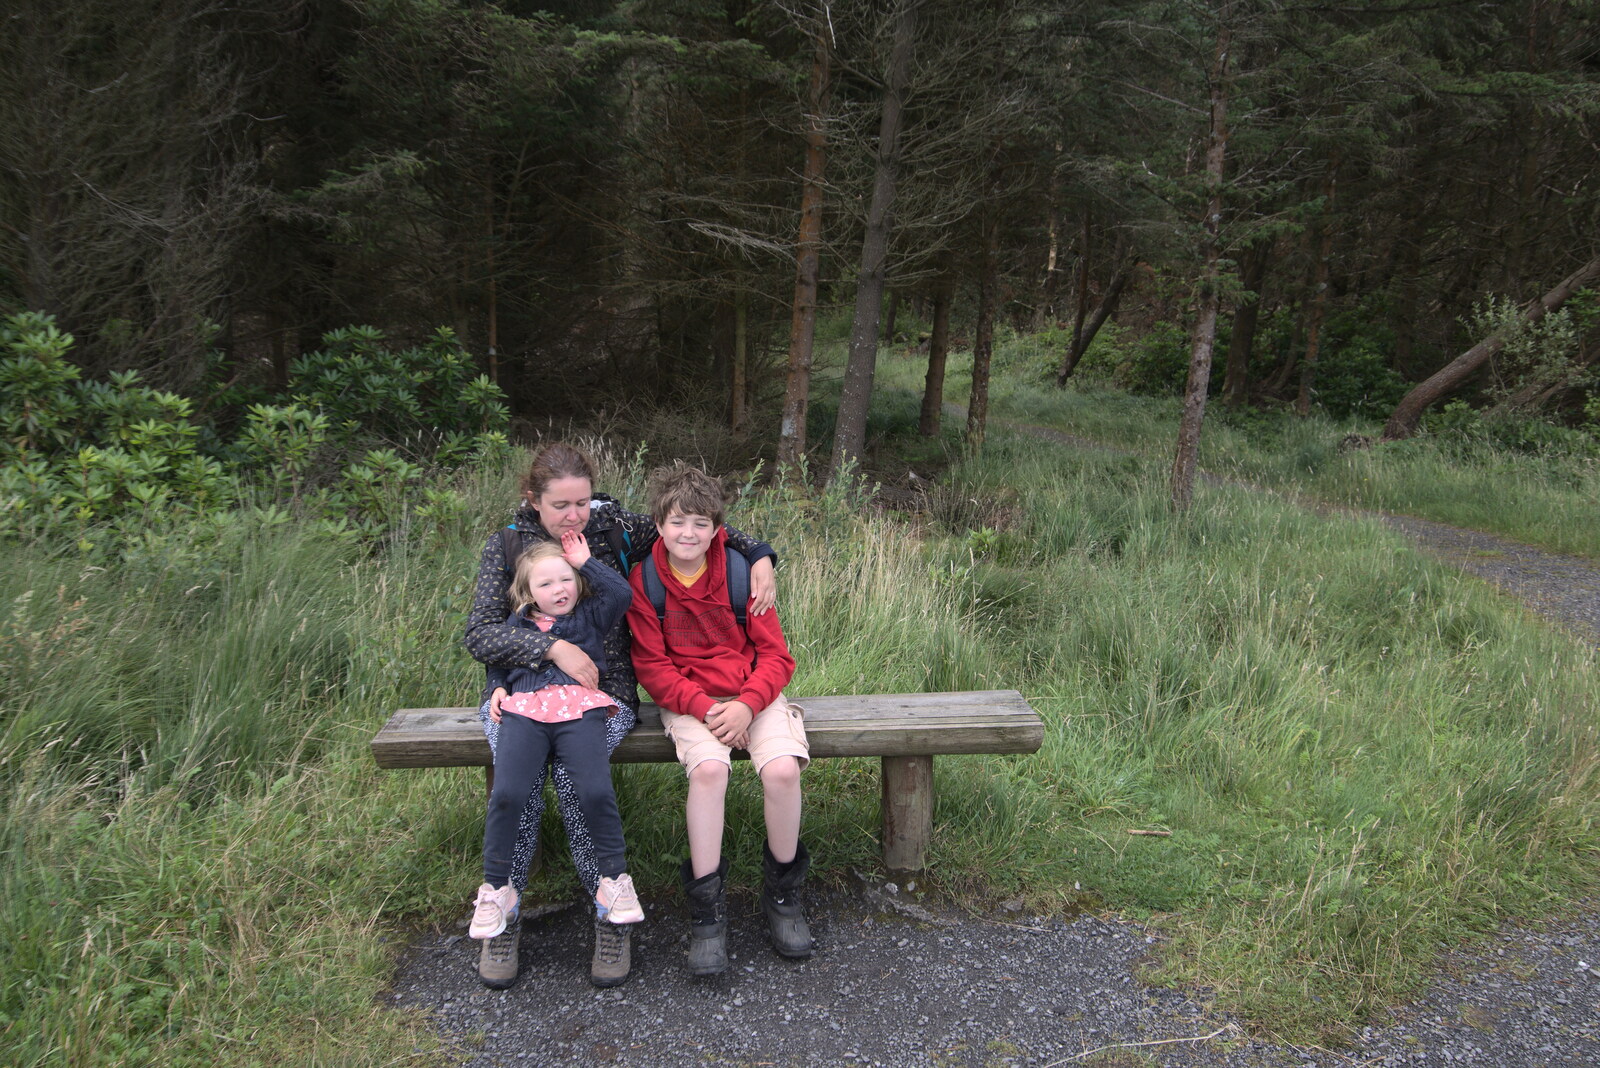 Rachel, Isobel and Fred on a bench from Walks Around Benbulben and Carrowmore, County Sligo, Ireland - 13th August 2021